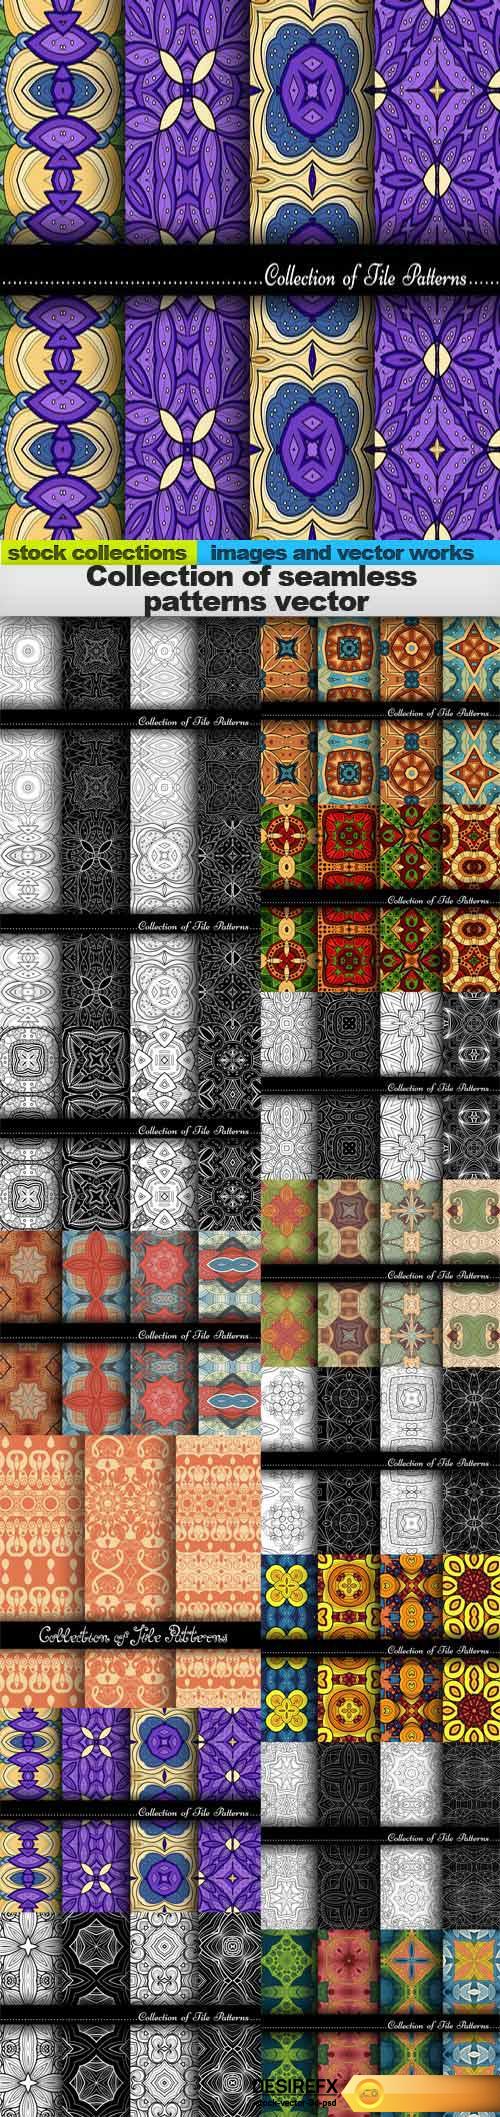 Collection of seamless patterns vector, 15 x EPS